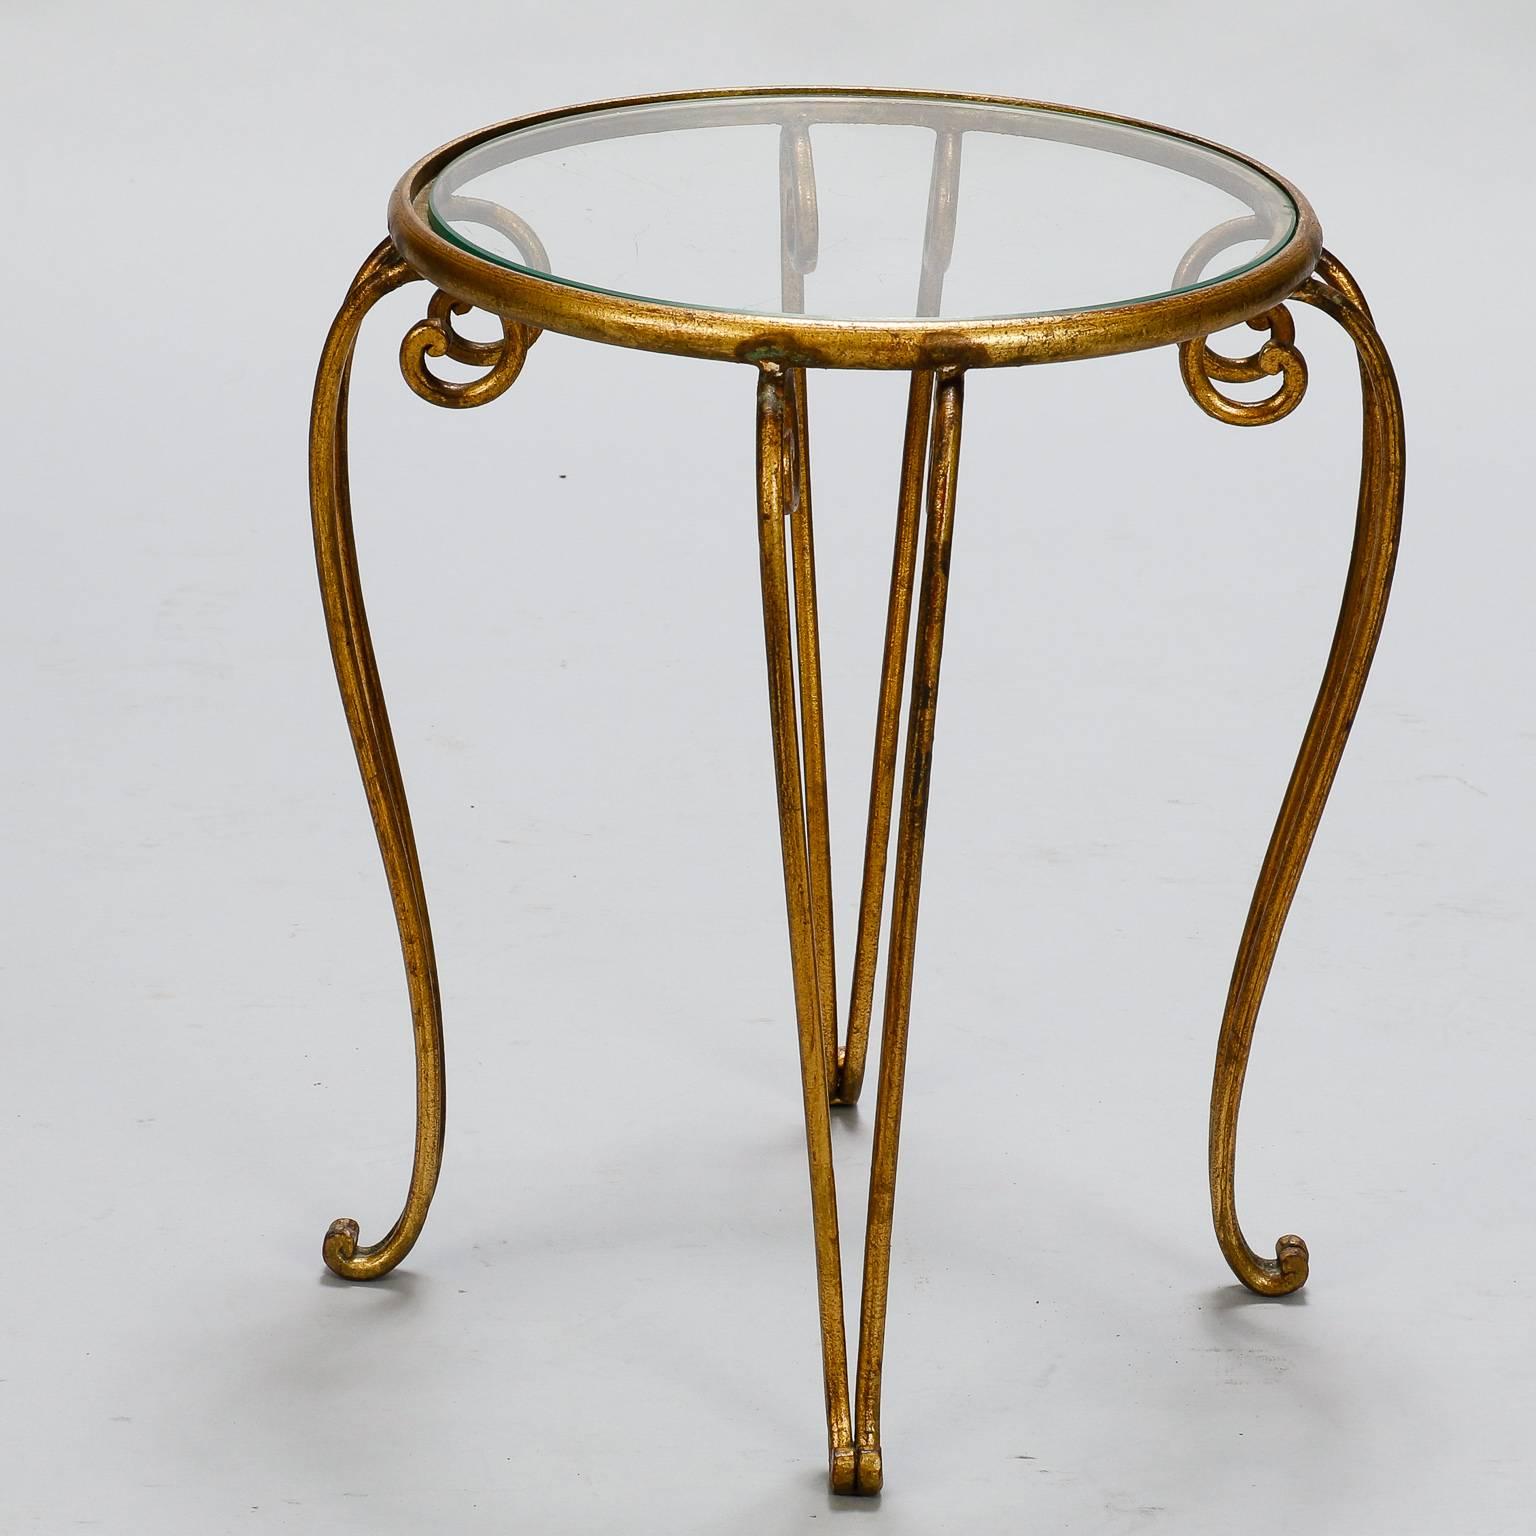 Iron base side table features a gilt finish, cabriole legs and round, clear glass table top, circa 1960s. Excellent vintage condition with some wear consistent with age and use to metal, surface scratches on glass. Table top is 12.5